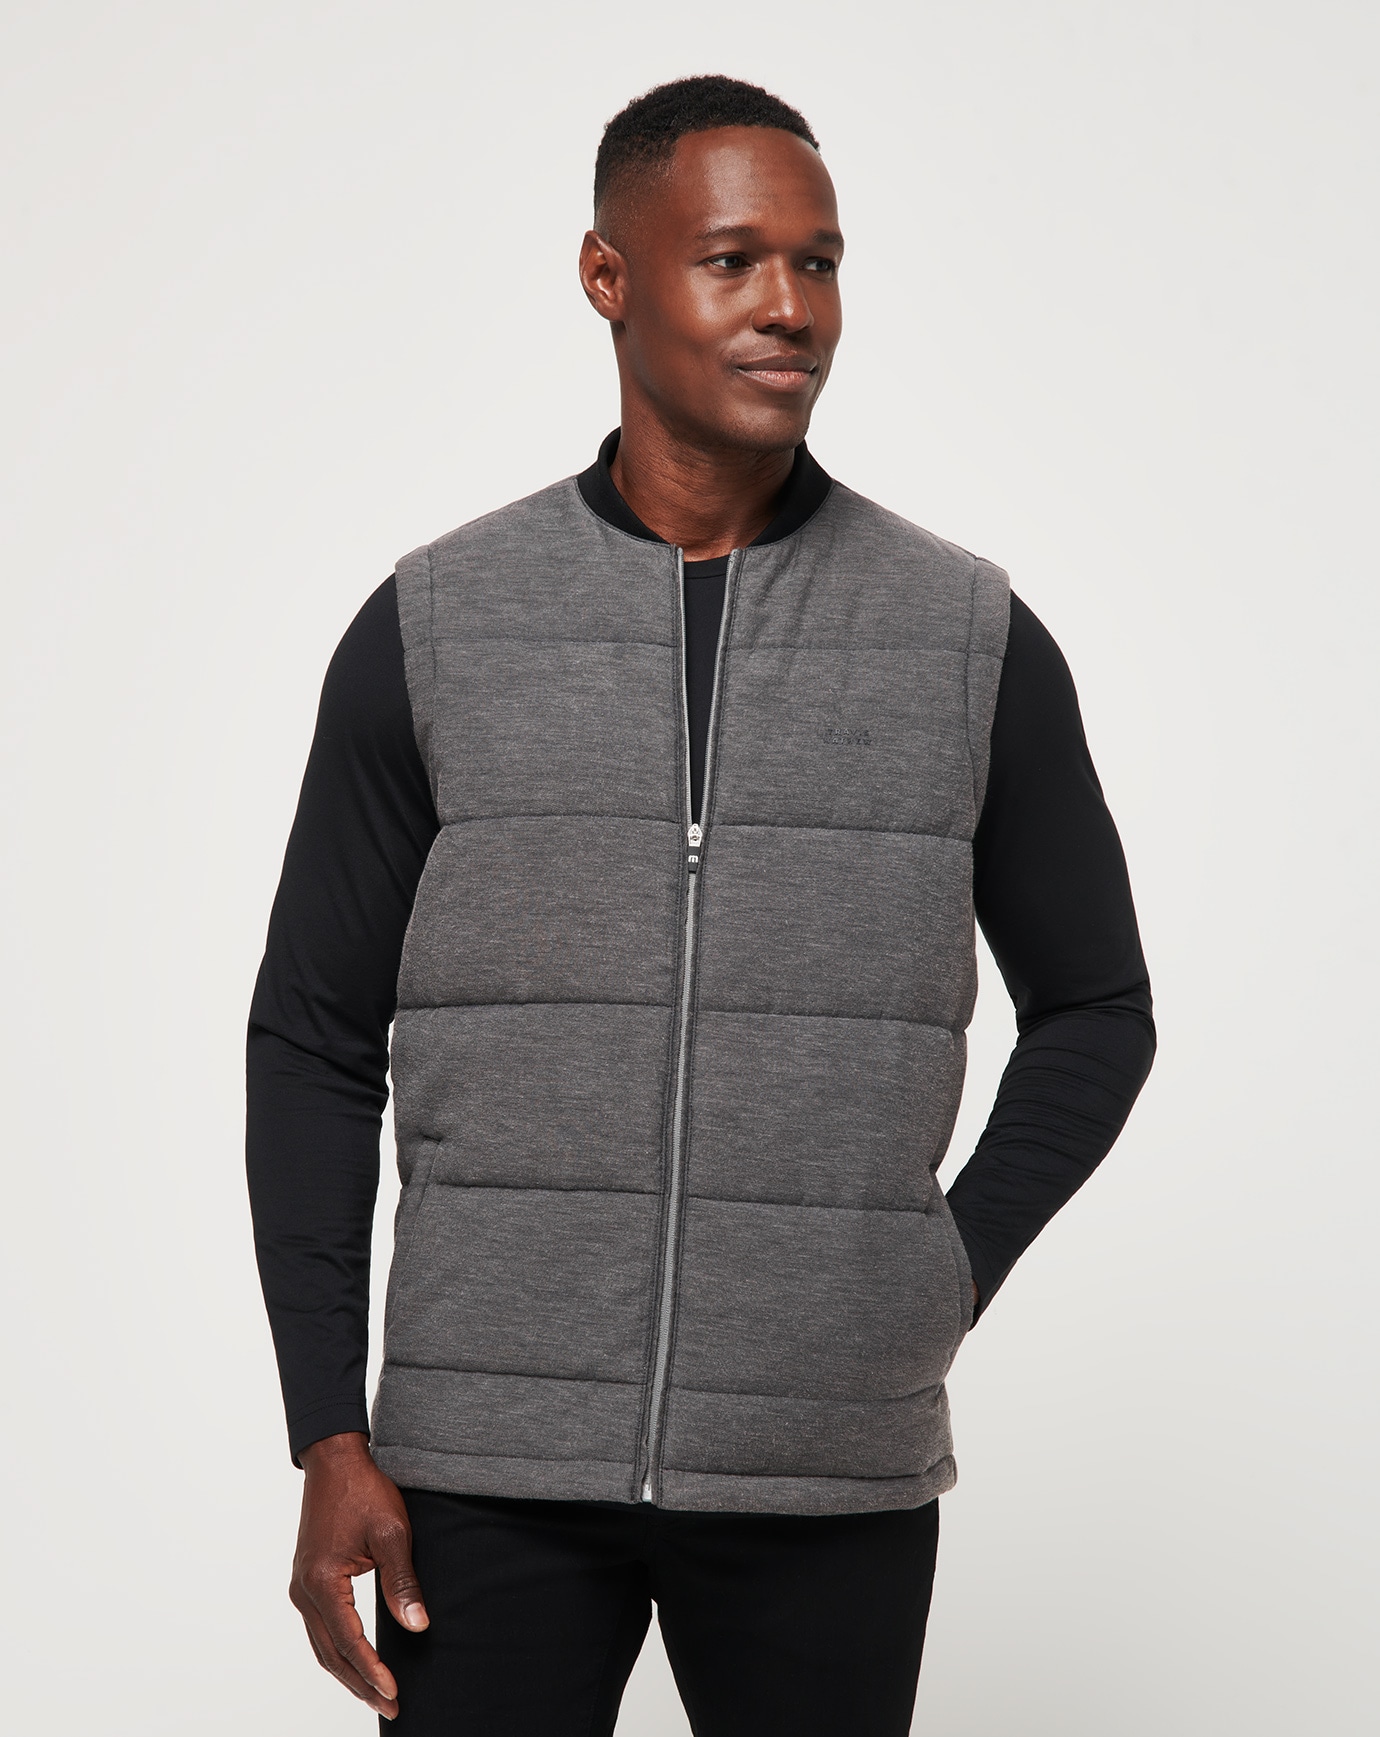 Related Product - CLIMATE DROP VEST